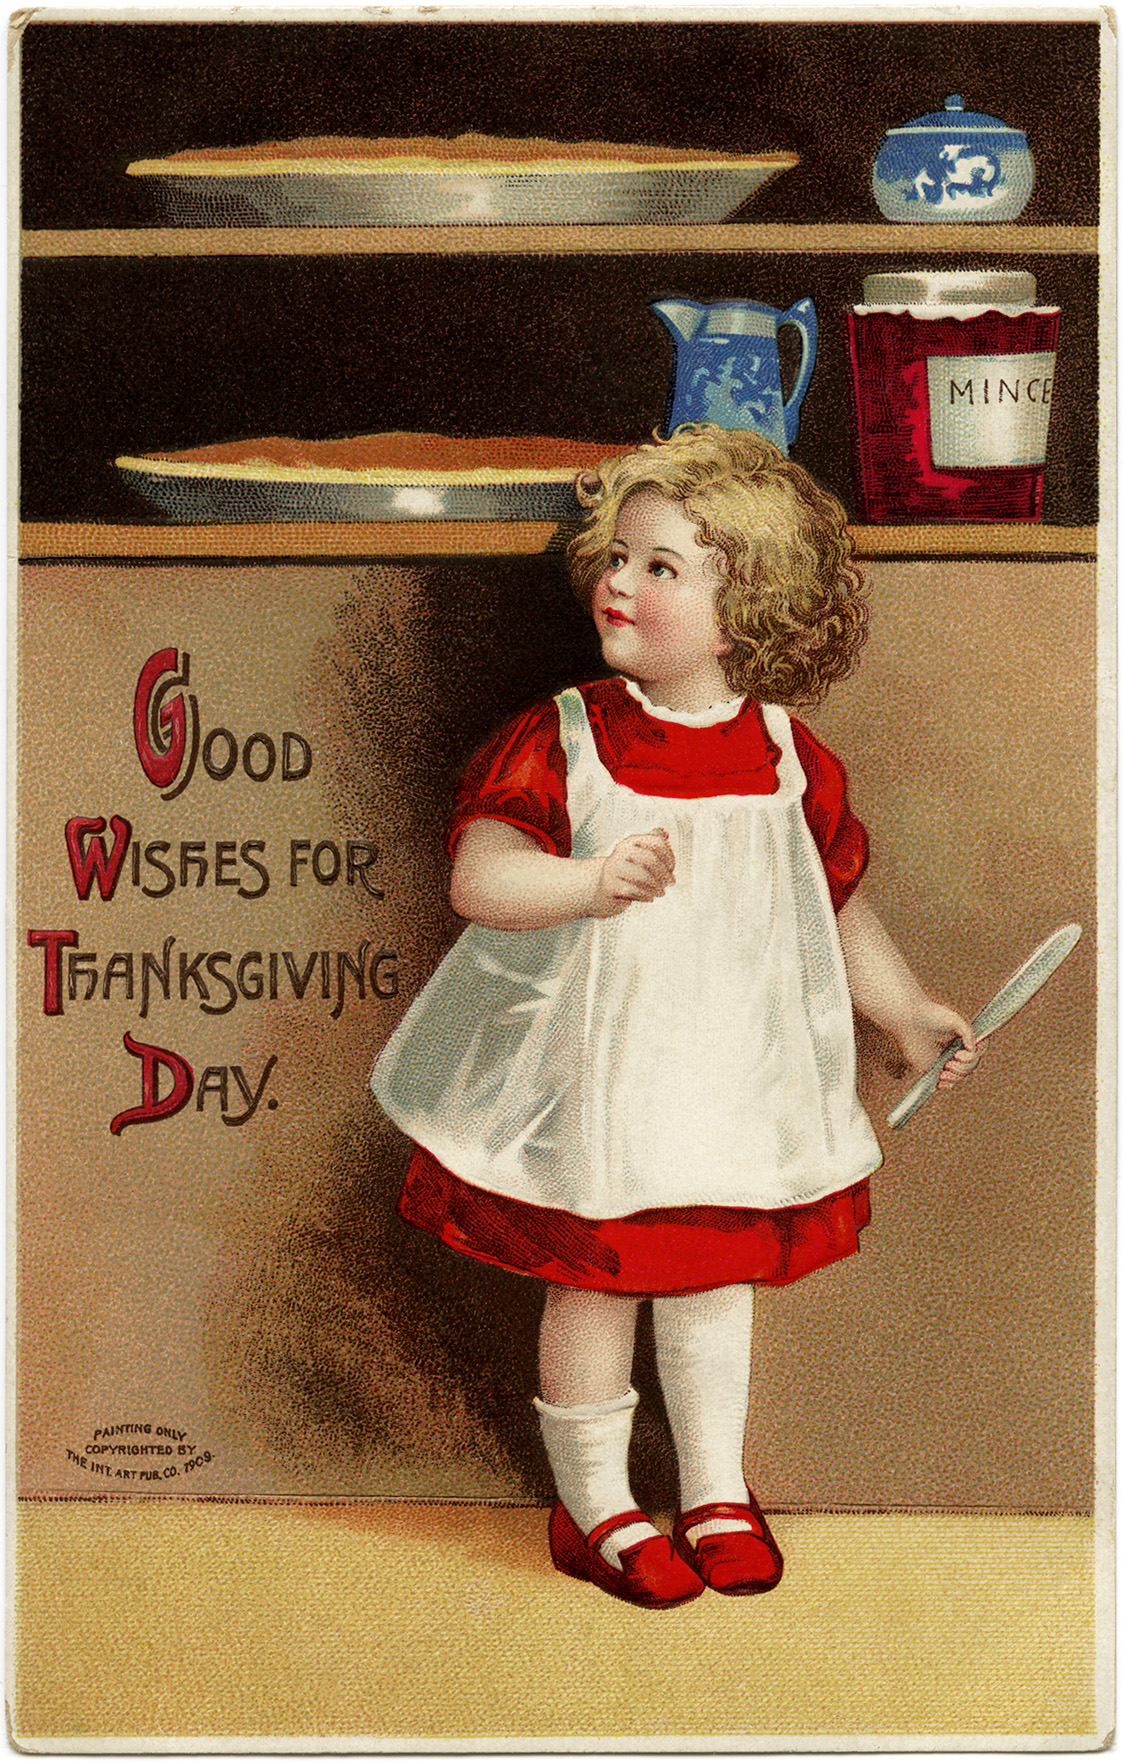 vintage clapsaddle postcard, antique thanksgiving card, girl baking clipart, red dress wooden spoon pie mince, old fashioned cooking image